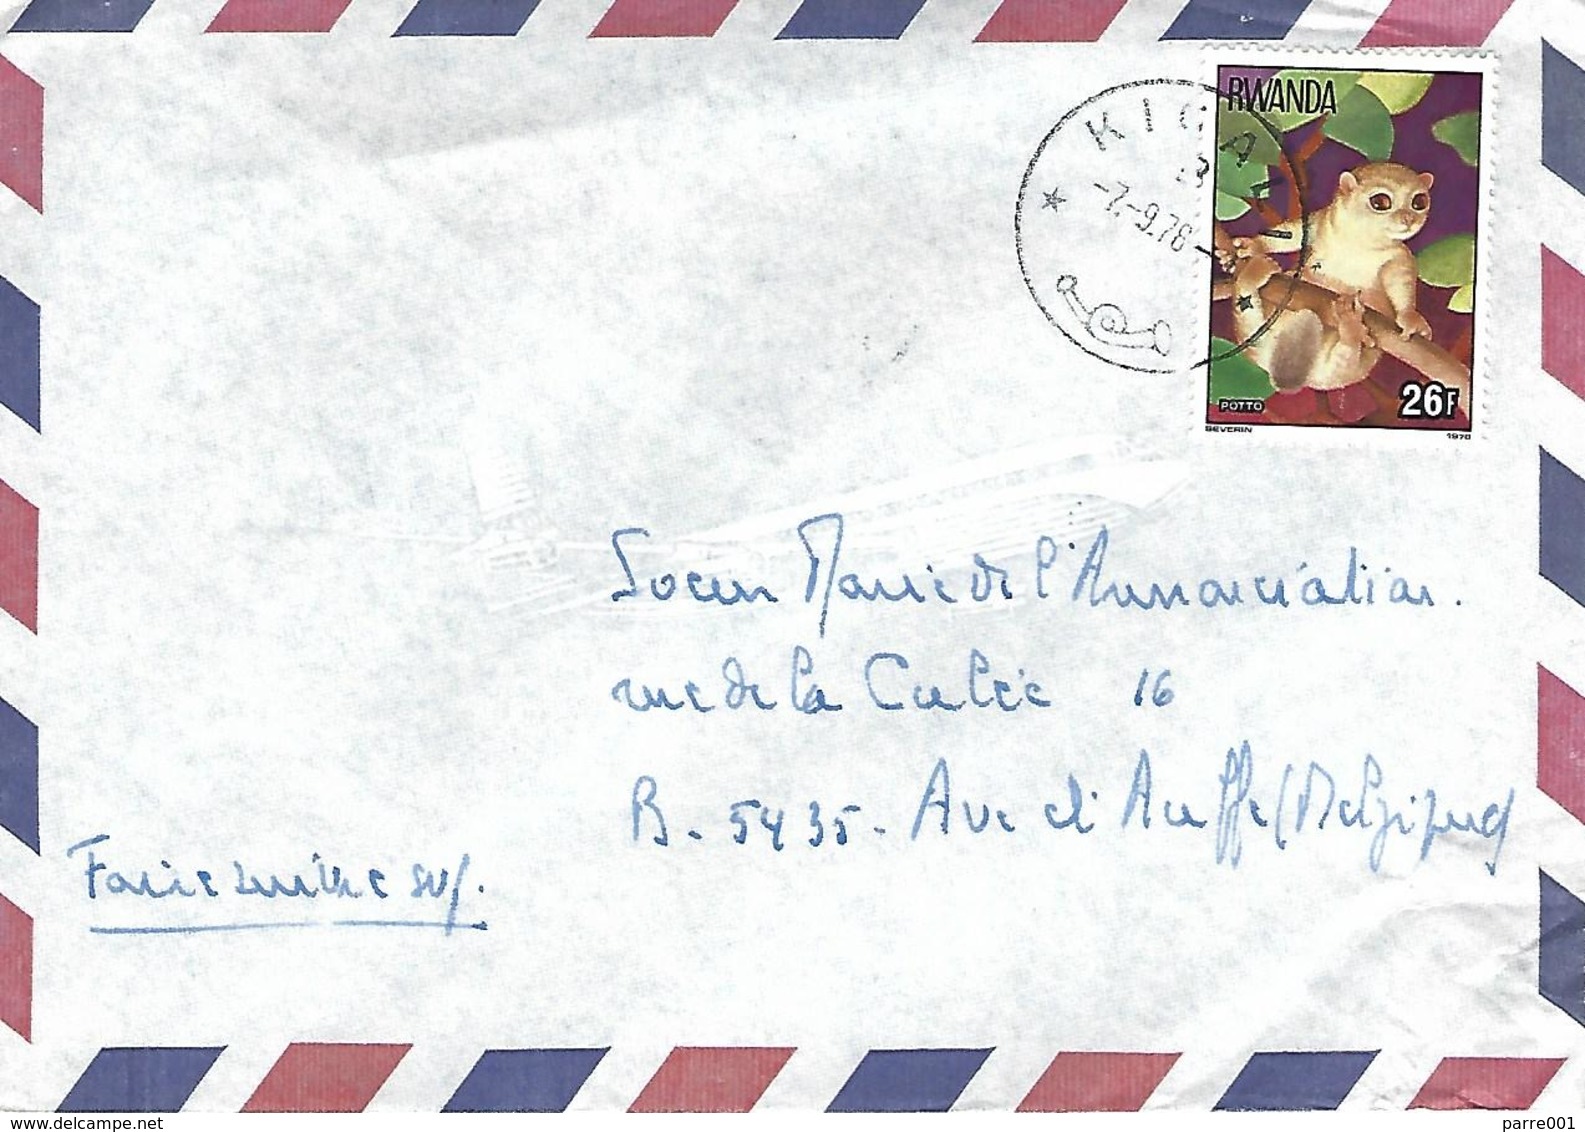 Rwanda 1978 Kigali Potto Nocturnal Monkey Cover - Used Stamps